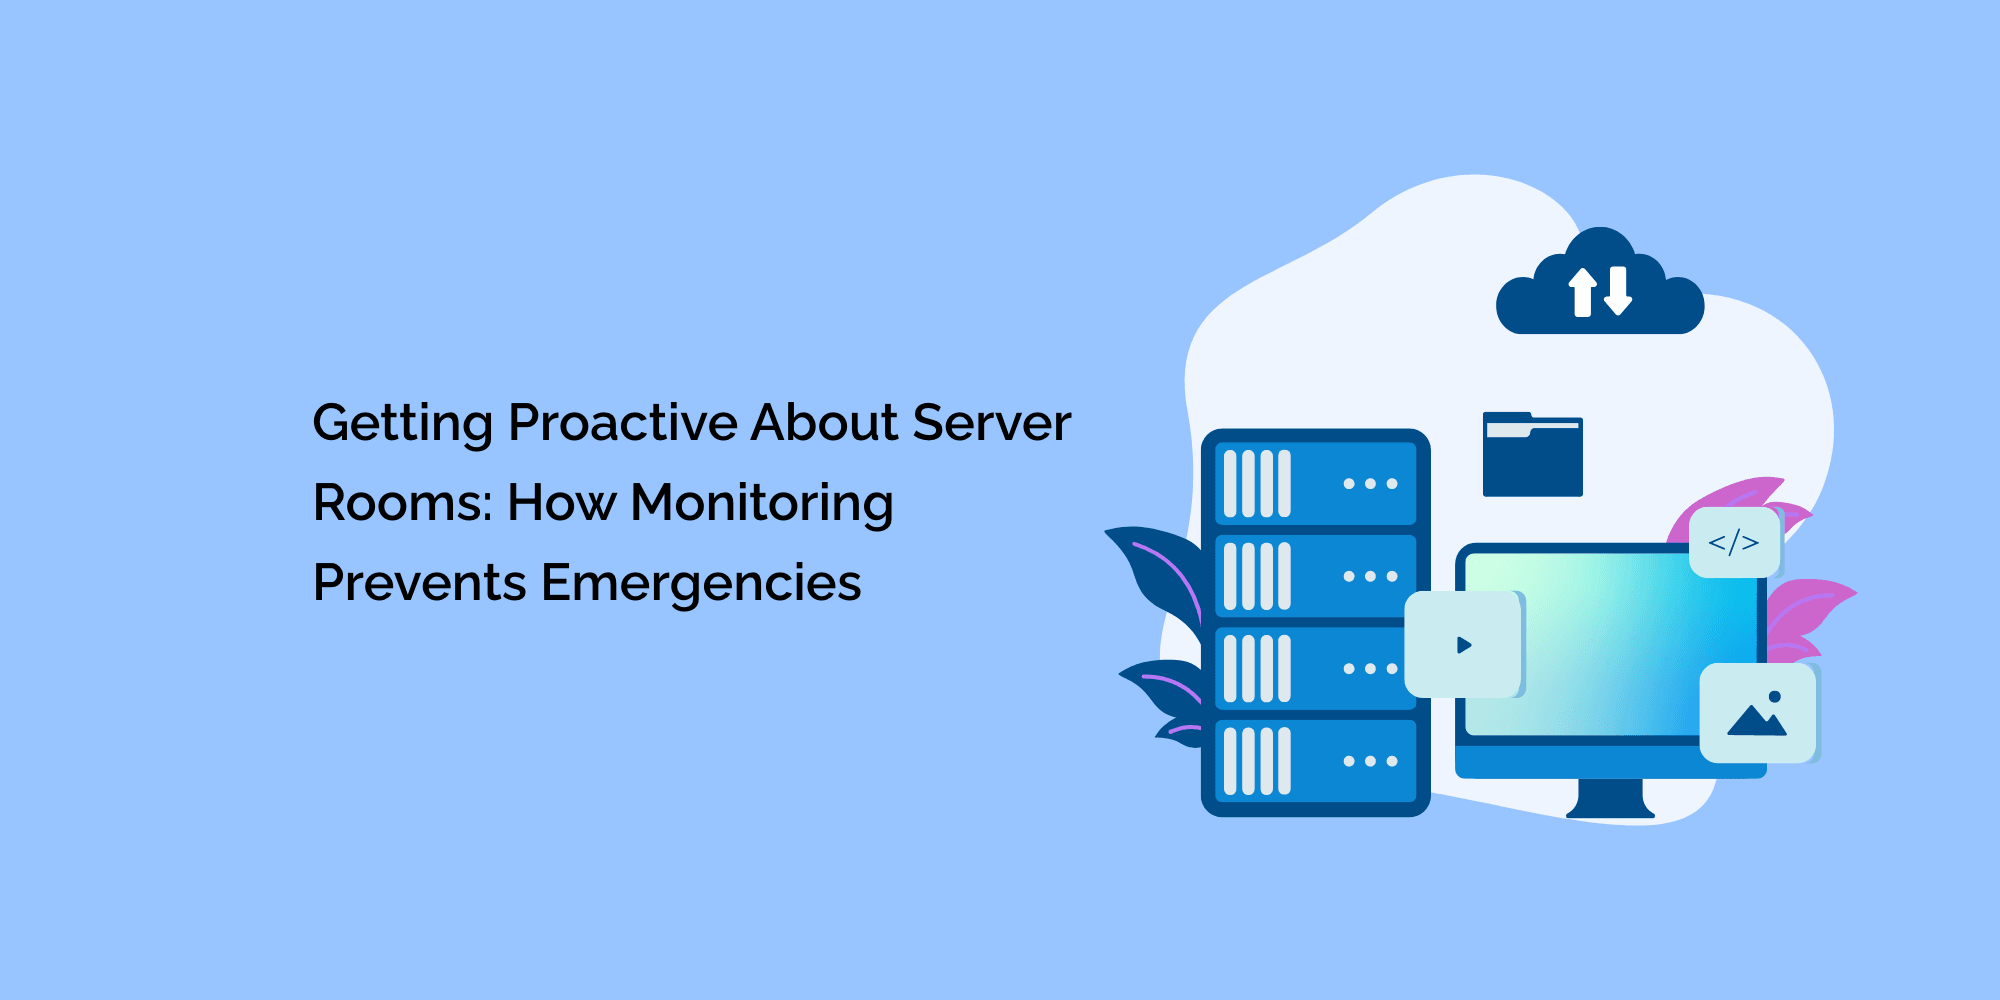 Getting Proactive About Server Rooms: How Monitoring Prevents Emergencies